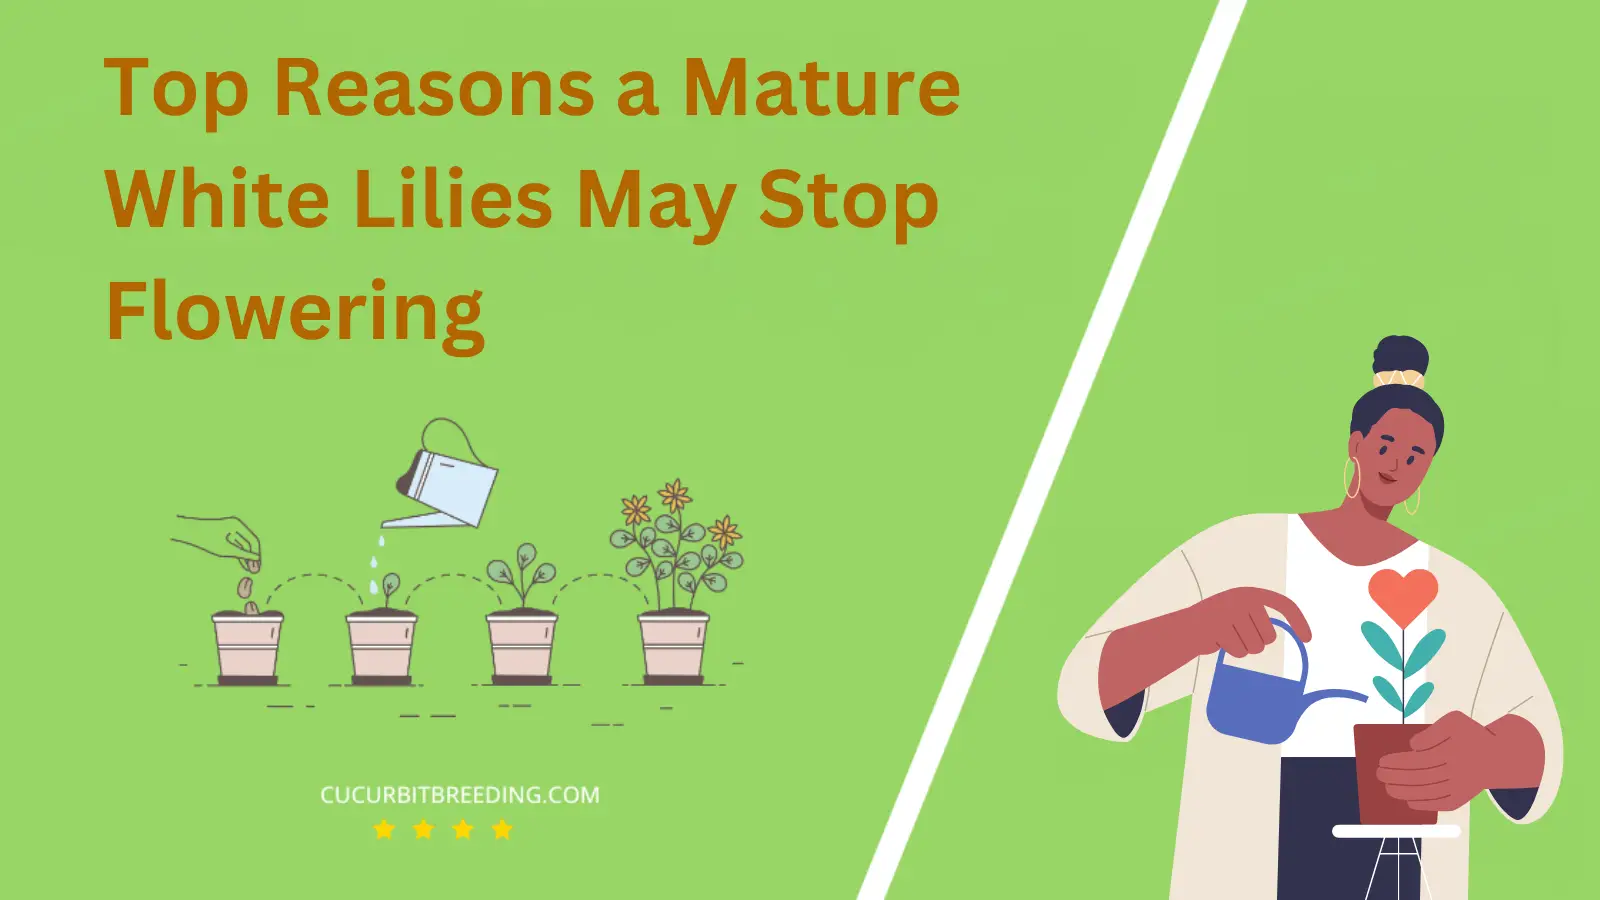 Top Reasons a Mature White Lilies May Stop Flowering